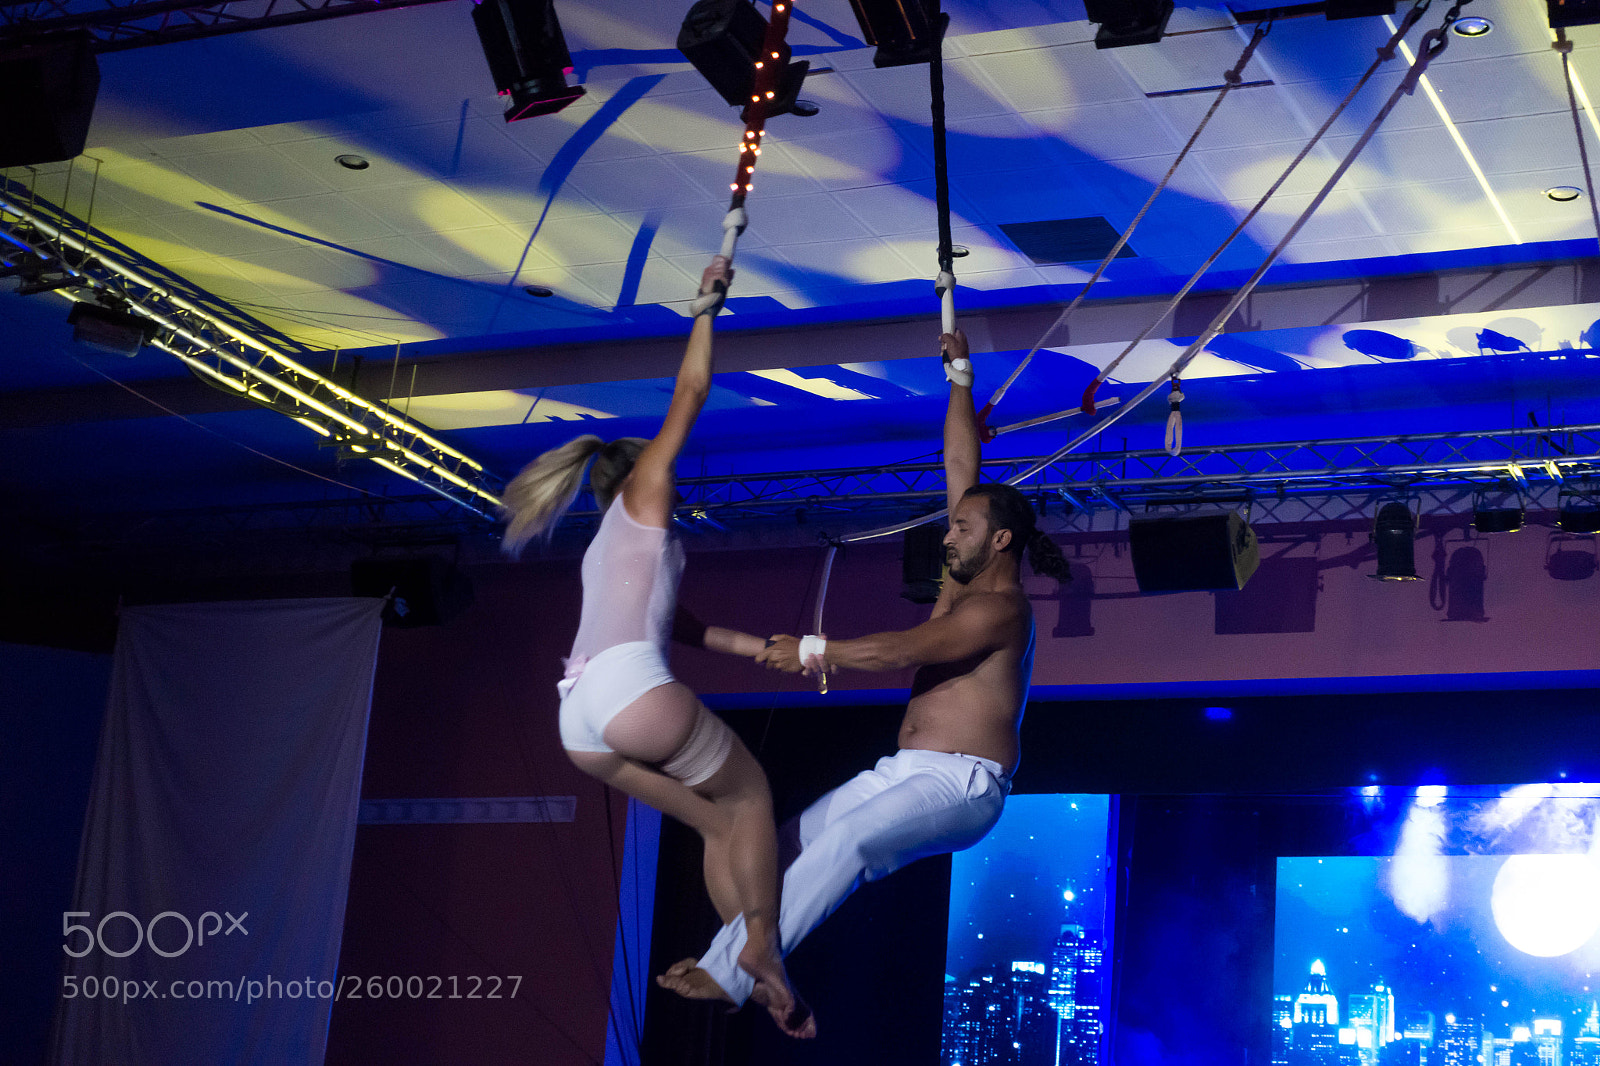 Sony Cyber-shot DSC-RX100 III sample photo. Dance in the air photography